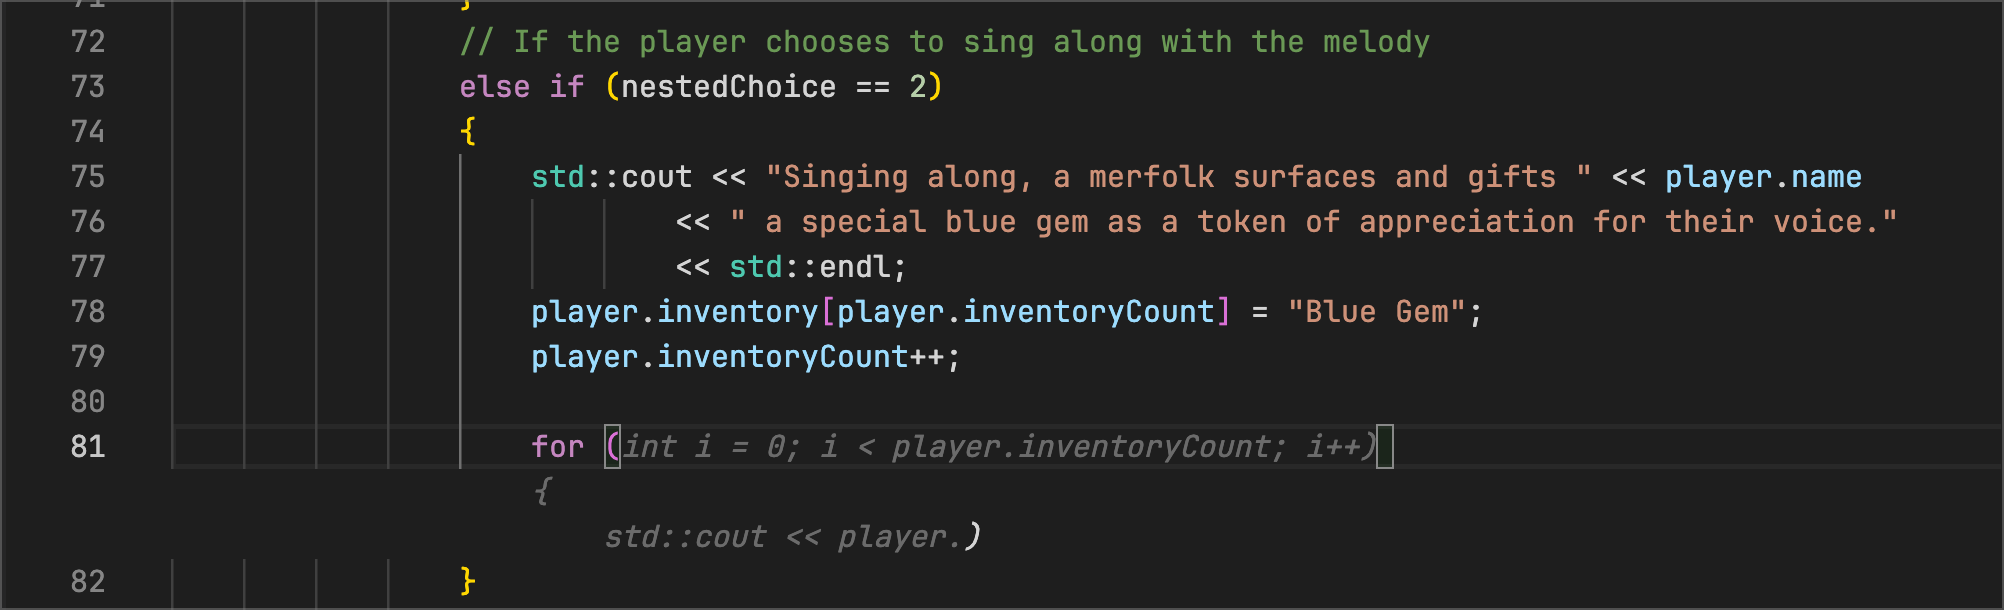 adventure.cpp - Code Suggestions demonstrates how to write a for loop to loop through the players inventory